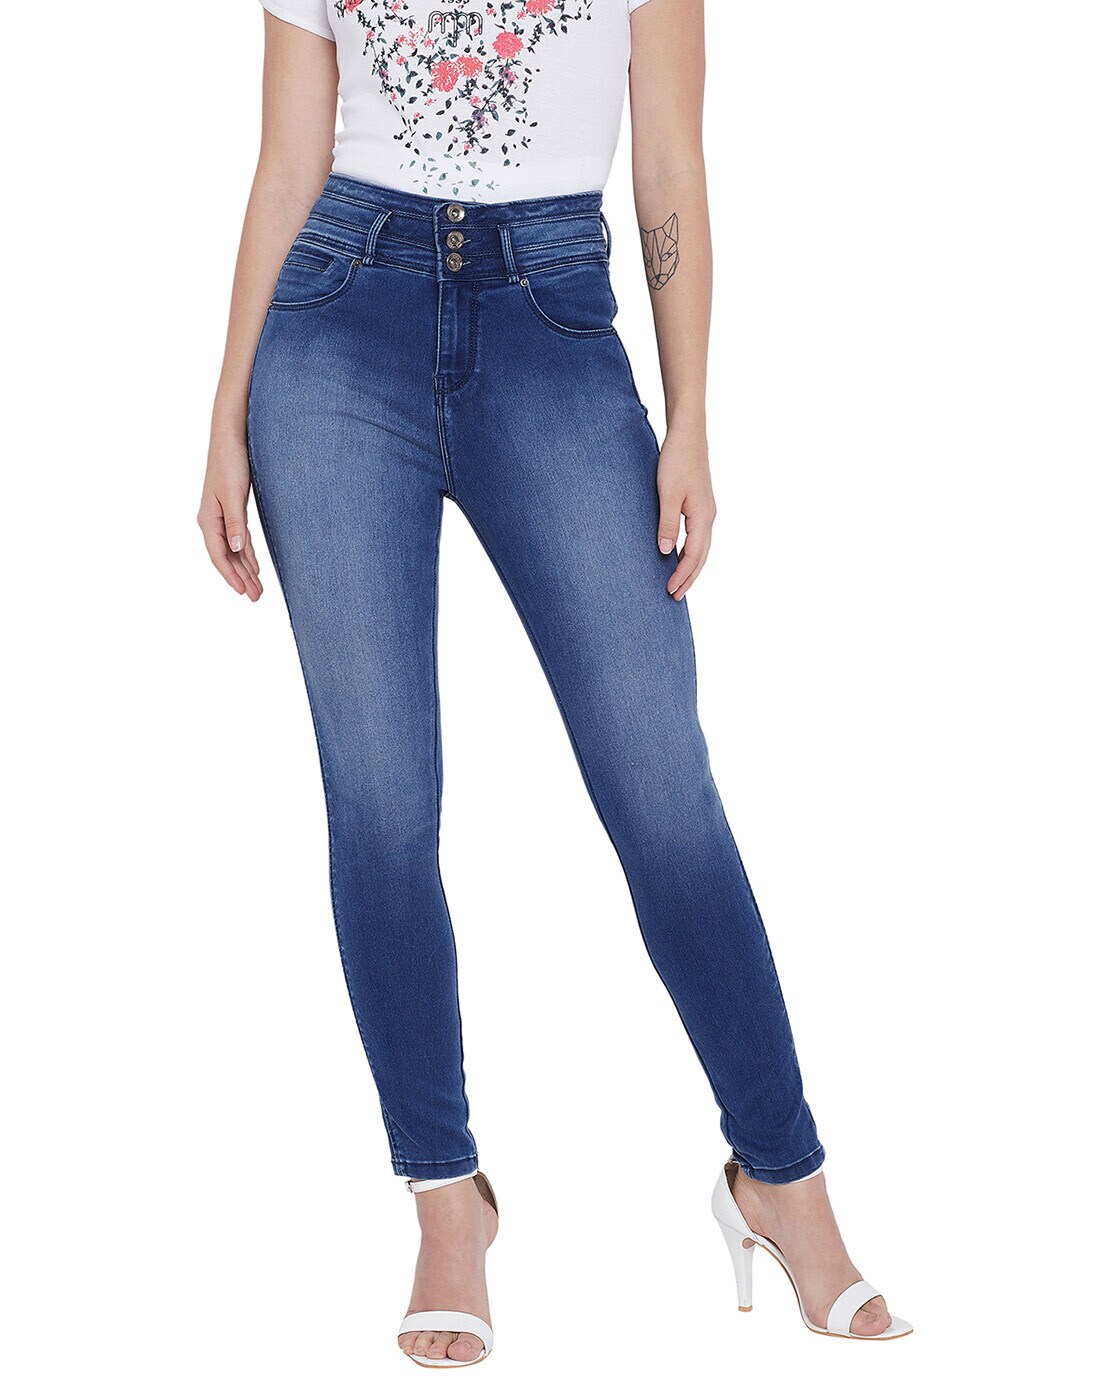 madame jeans